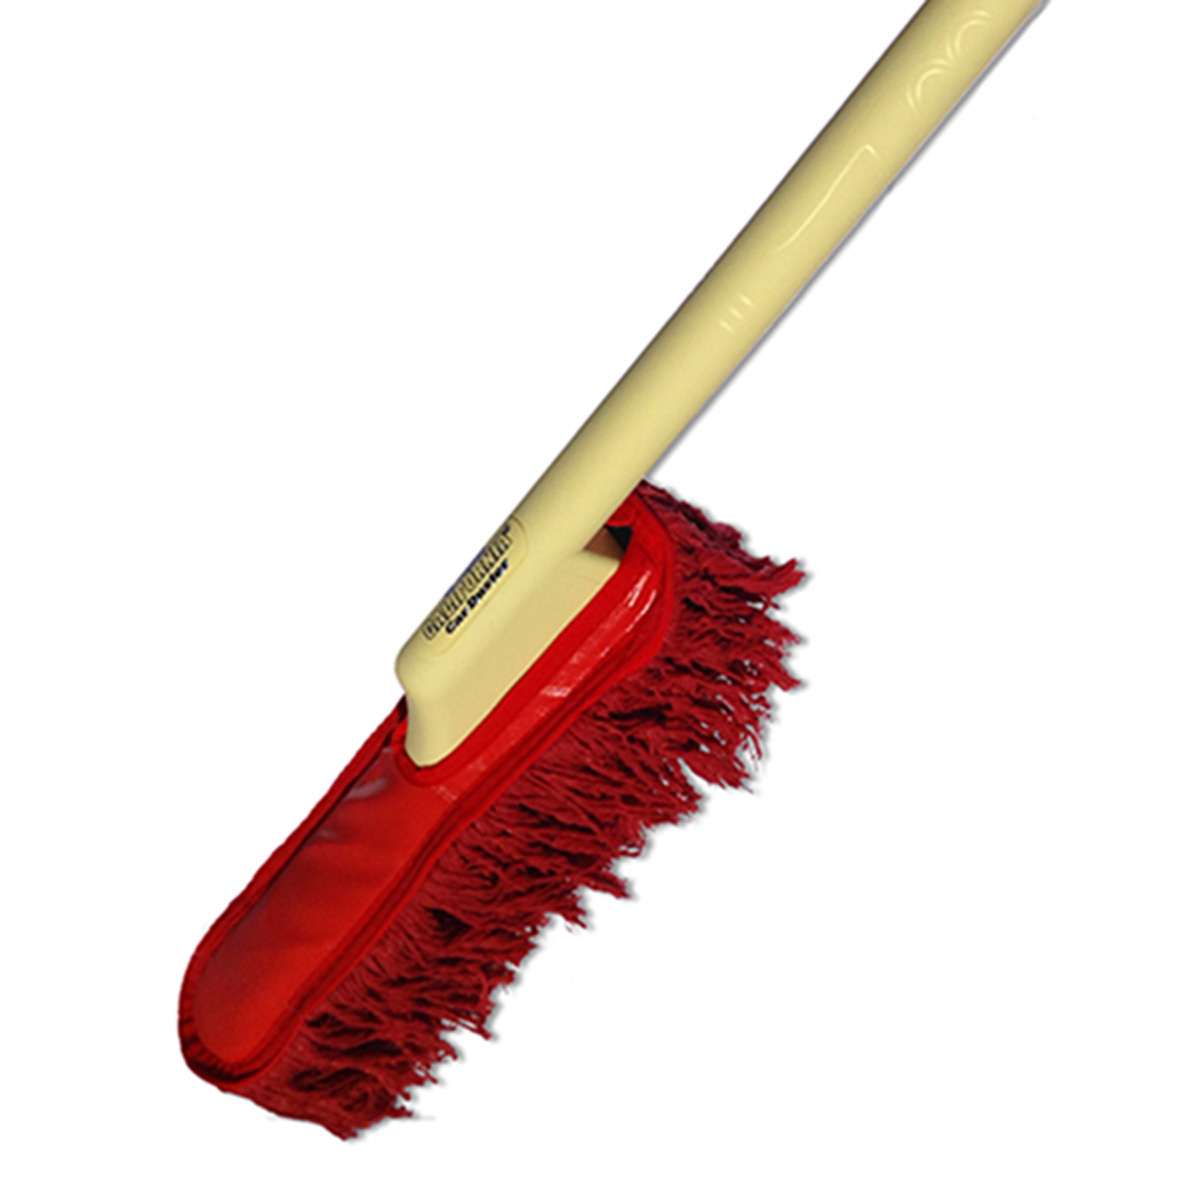 The Original California Car Duster With 26 Wood Handle